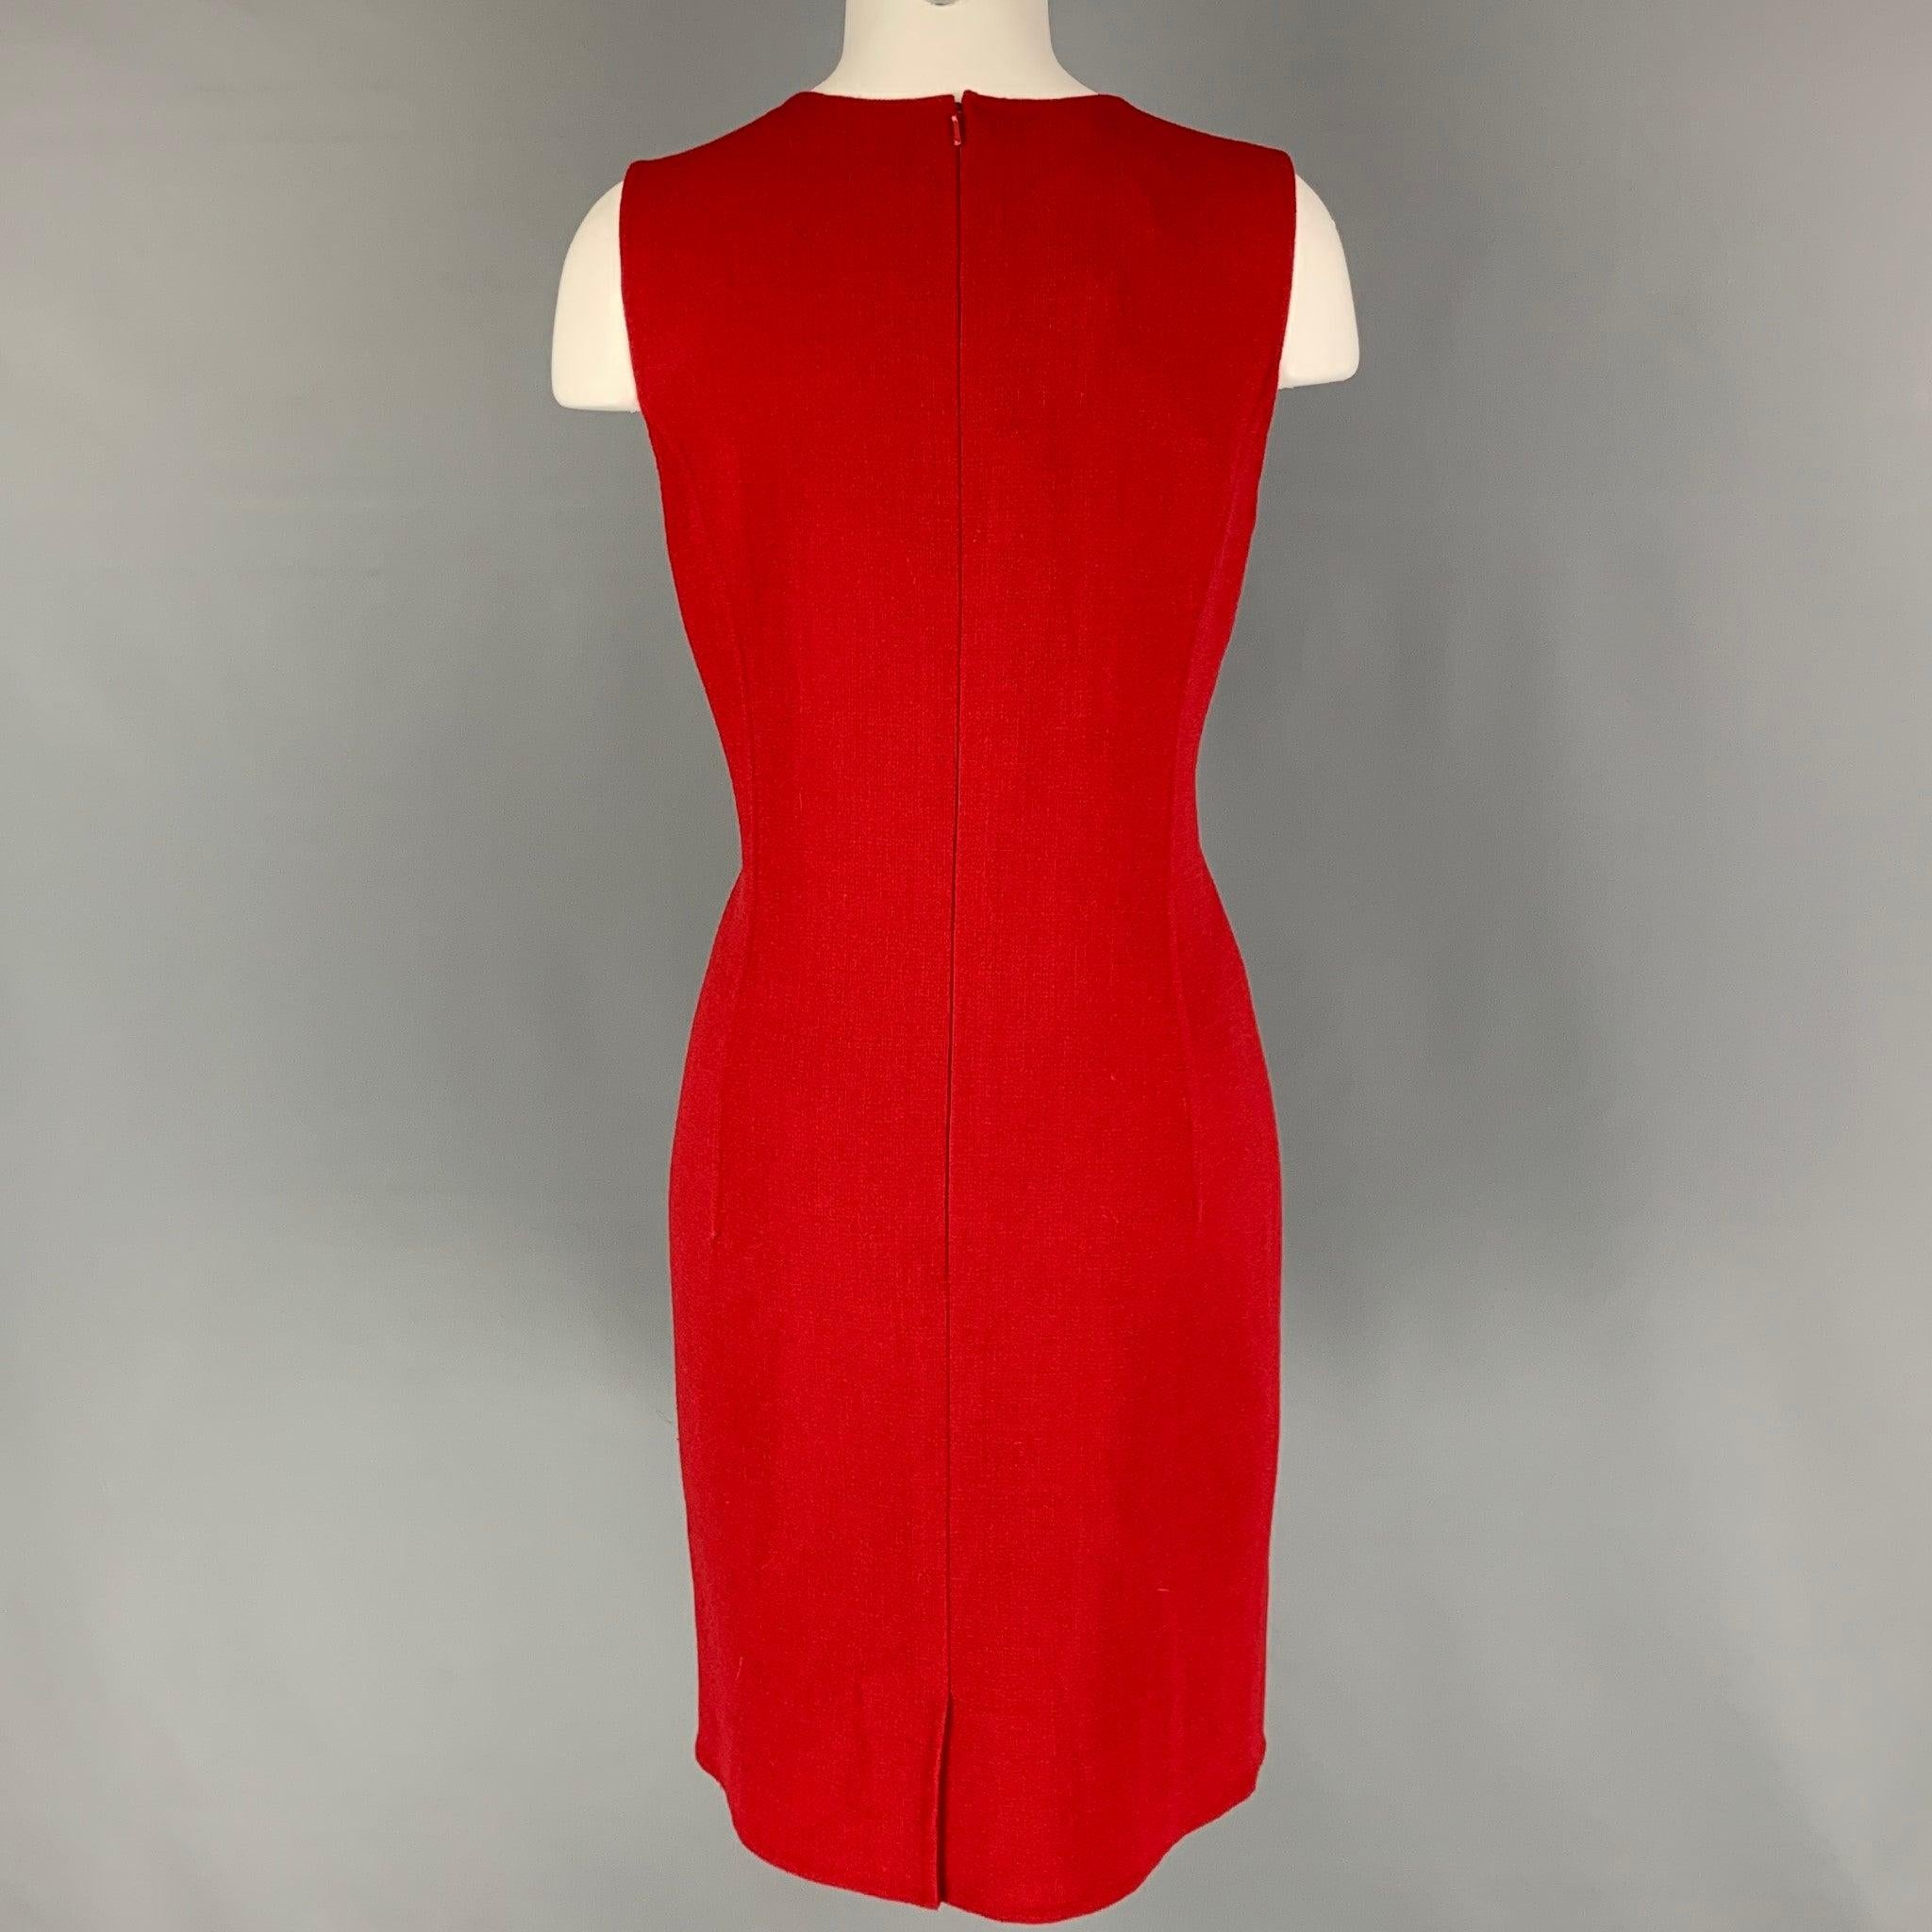 OSCAR DE LA RENTA dress comes in a red virgin wool blend featuring a shift style, sleeveless, and a back zip up closure. Matching jacket sole separately. Made in Italy.
New With Tags. 

Marked:   6 

Measurements: 
 
Shoulder: 13.5 inches  Bust: 36